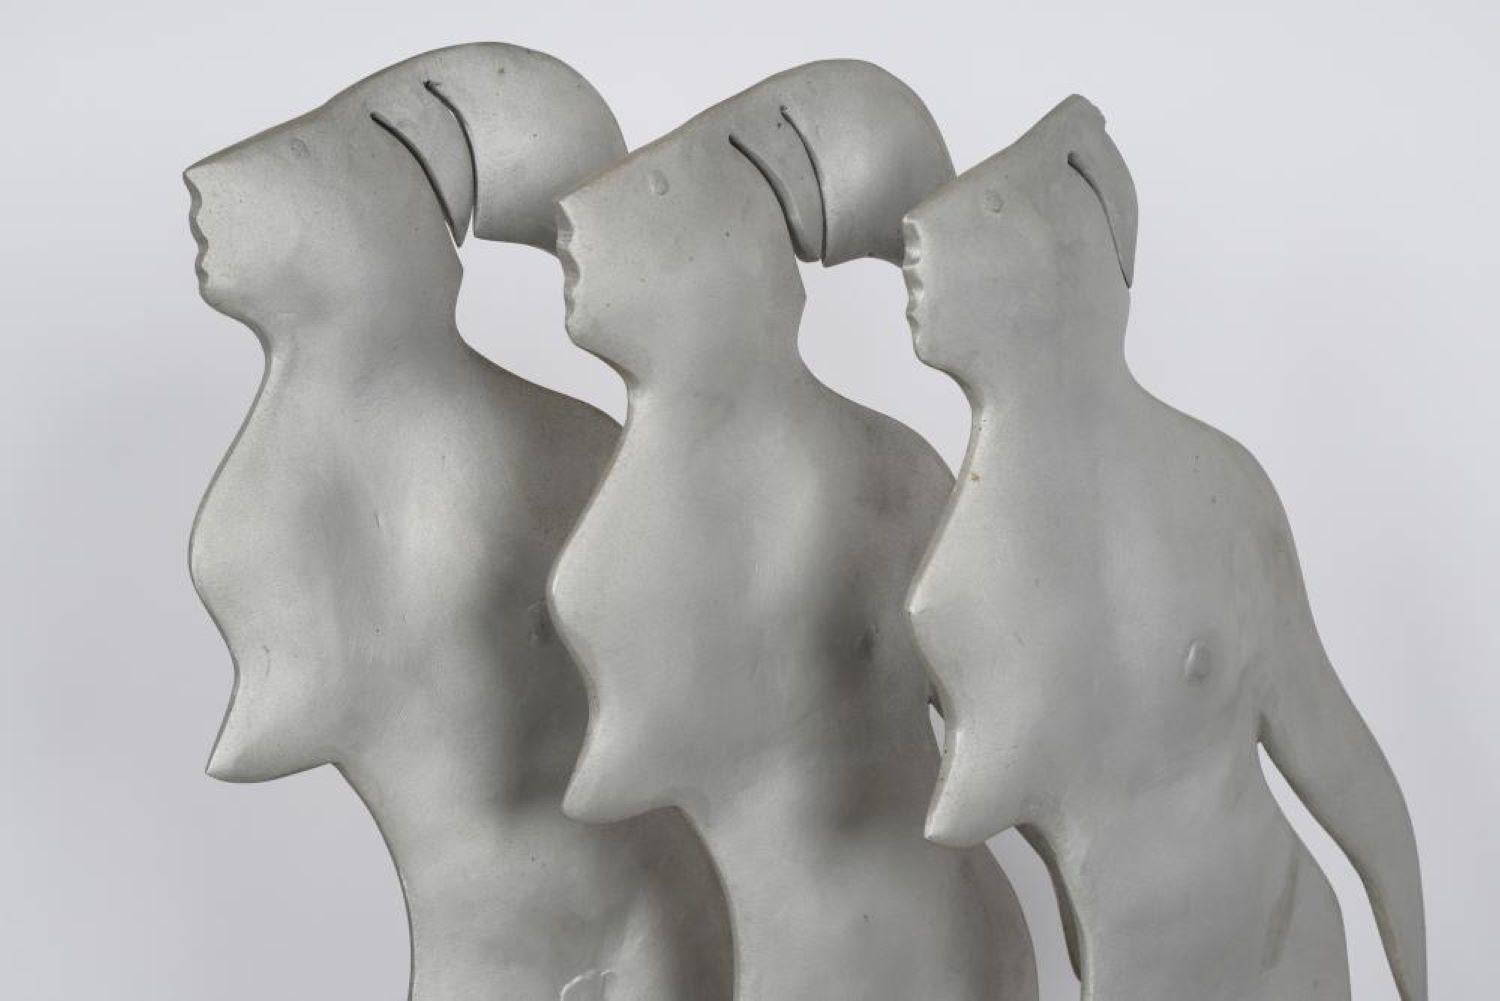 3 Figures by Michael Hill
Aluminum sculpture; Provenance: The Estate of Barbara Beretich, Artist & Collector of Art, Claremont, CA;
 